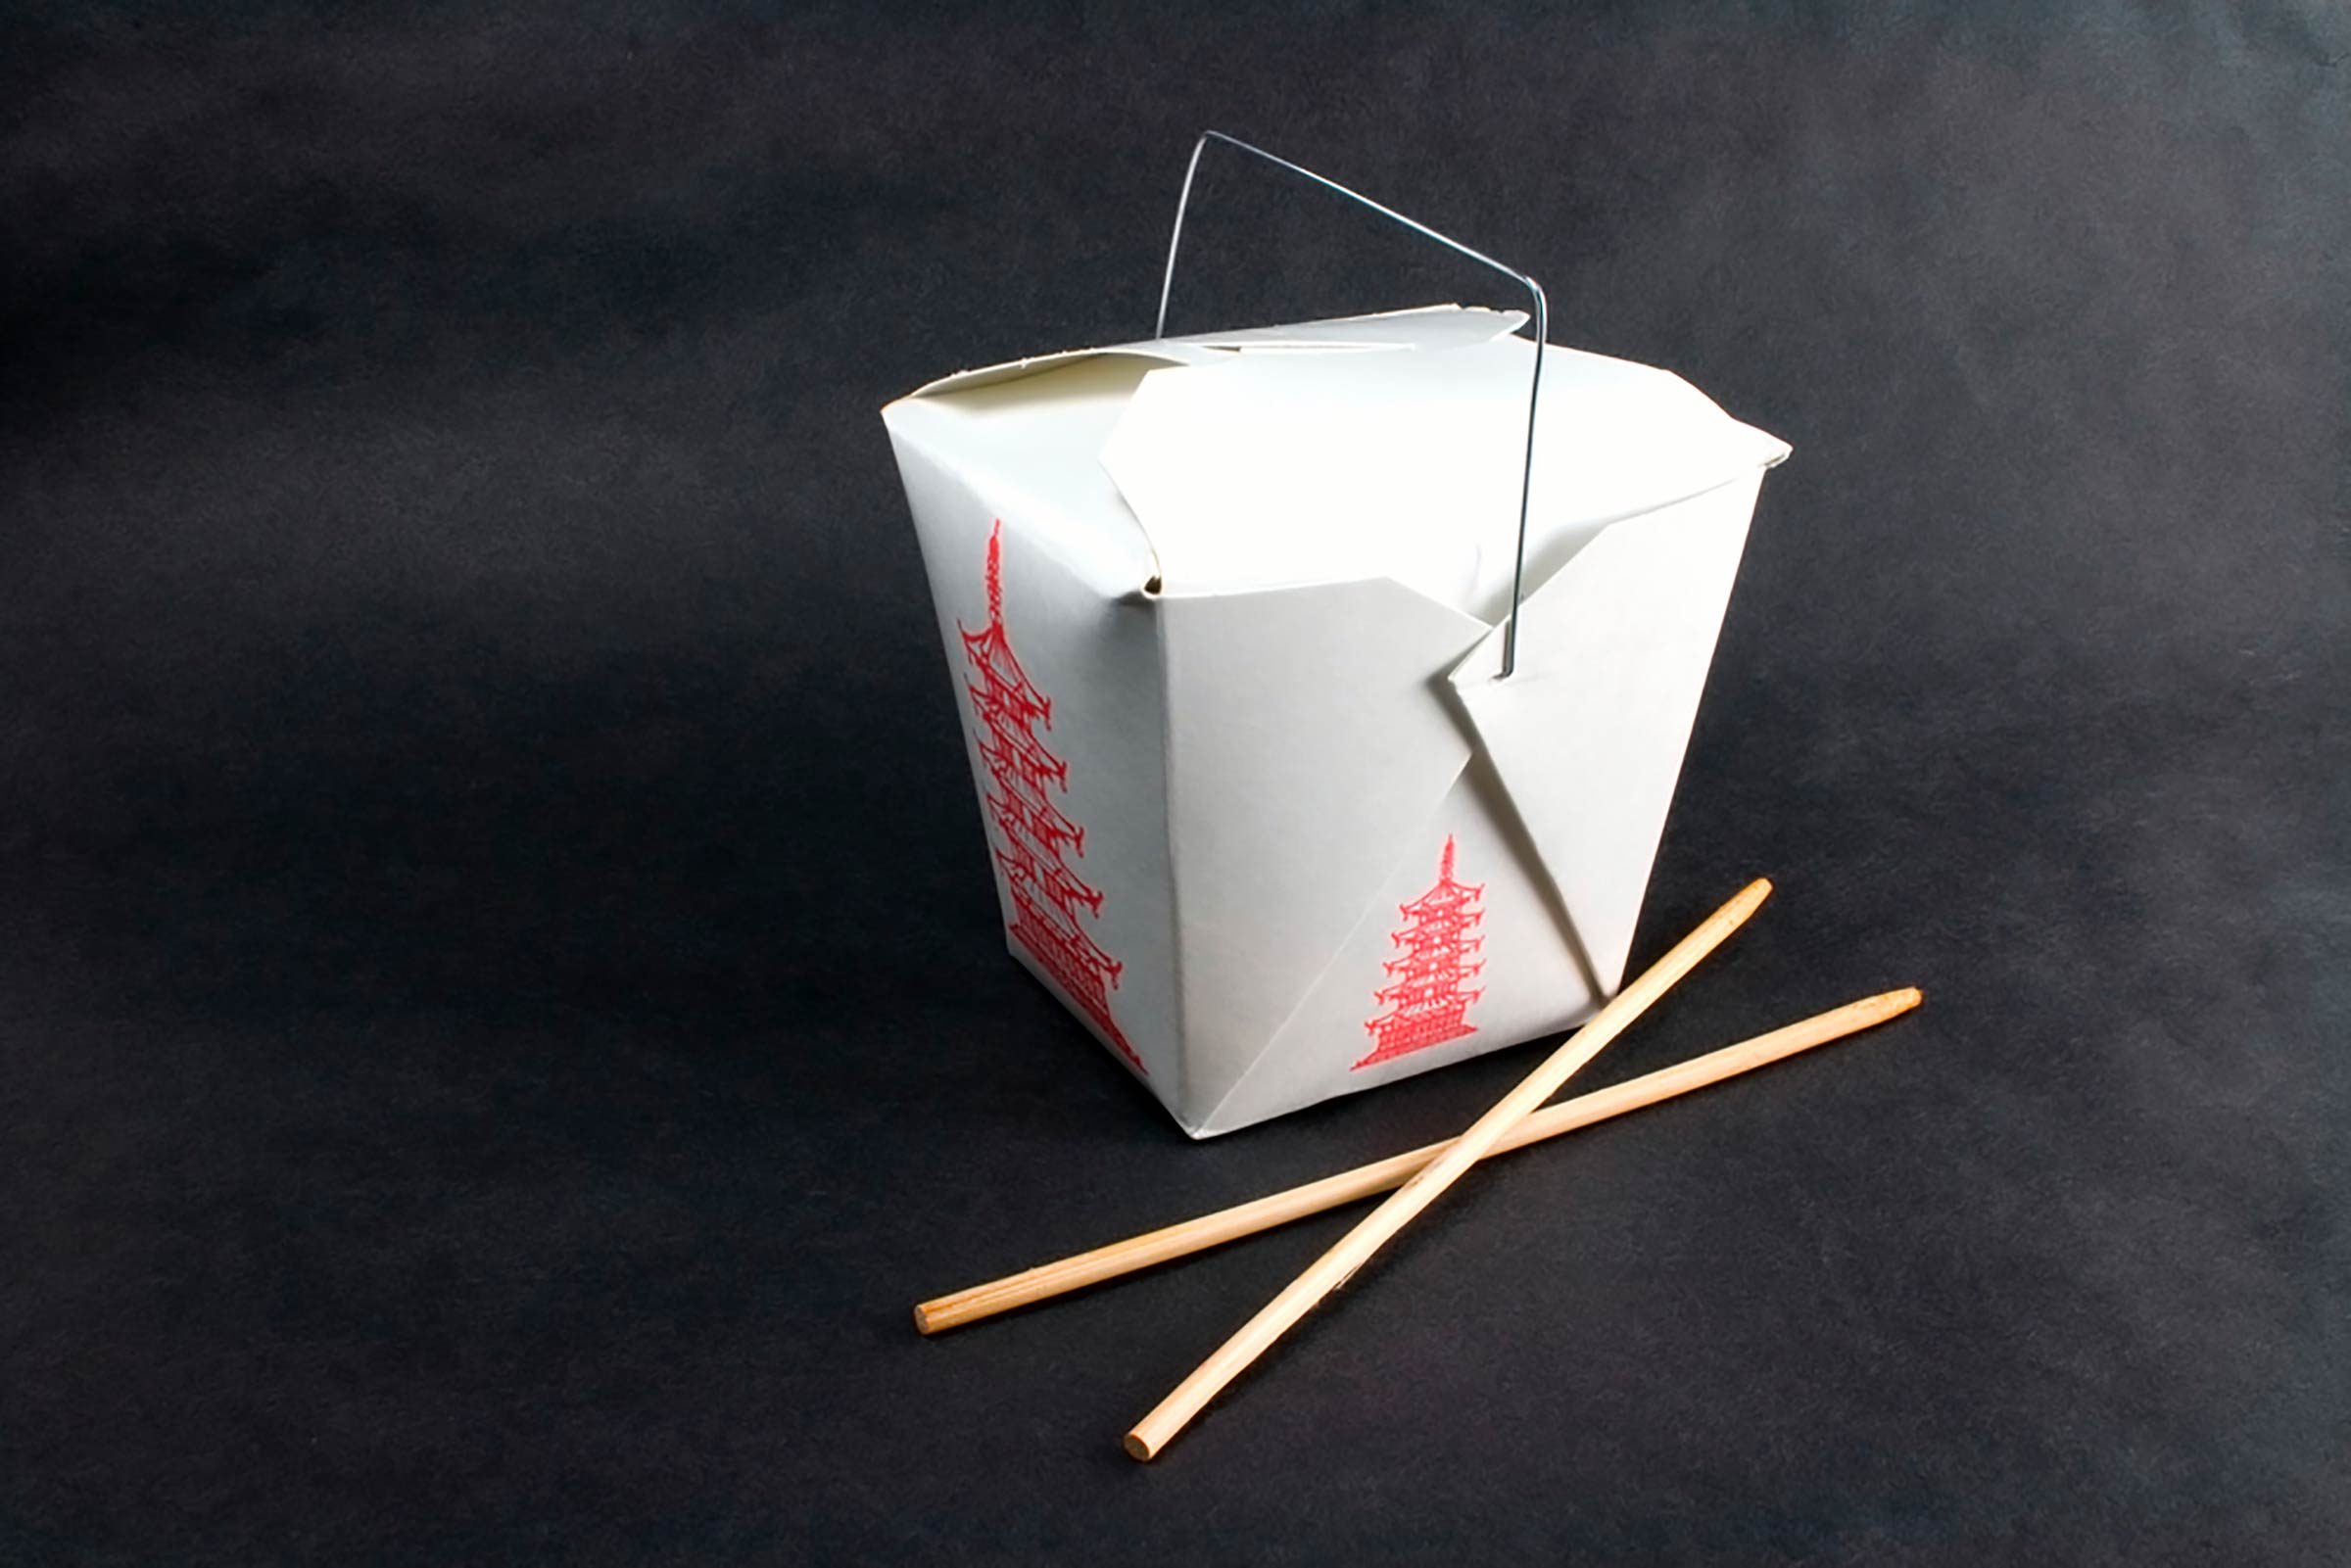 https://www.rd.com/wp-content/uploads/2017/10/Why-Youll-Never-Find-Chinese-Takeout-Boxes-in-China-2465842-Victoria-Short-Shutterstock.jpg